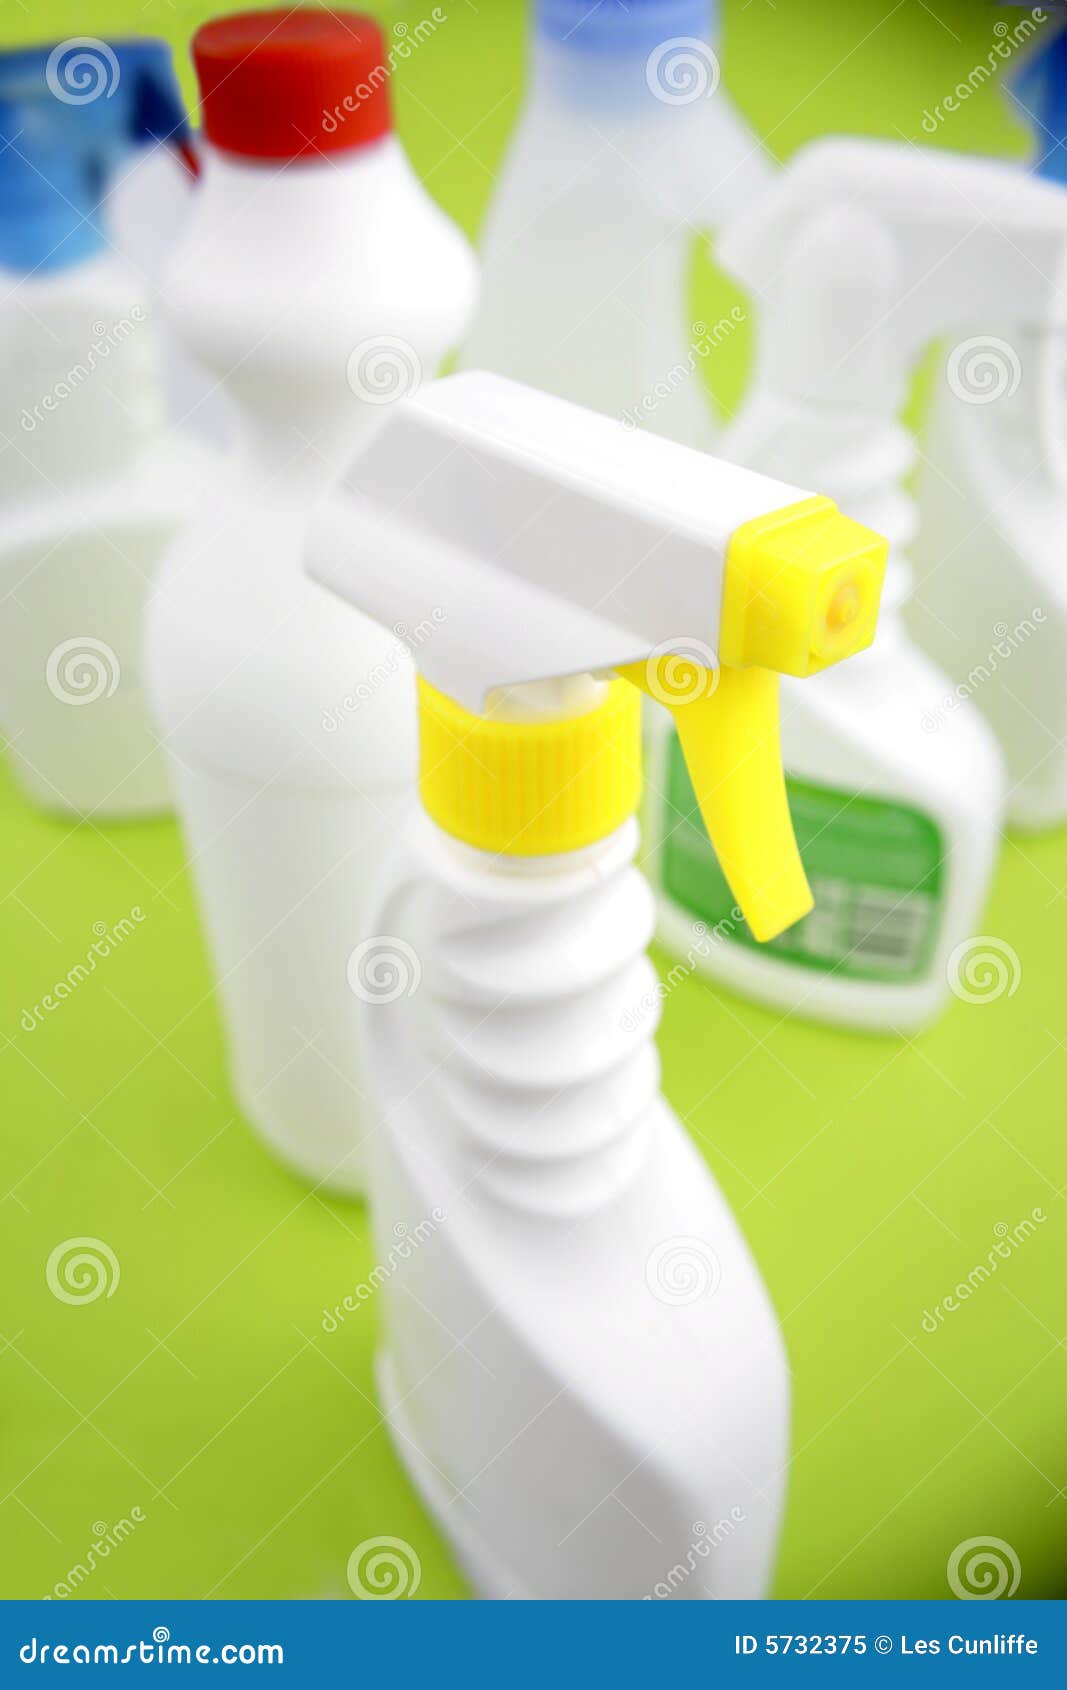 cleaning bottles